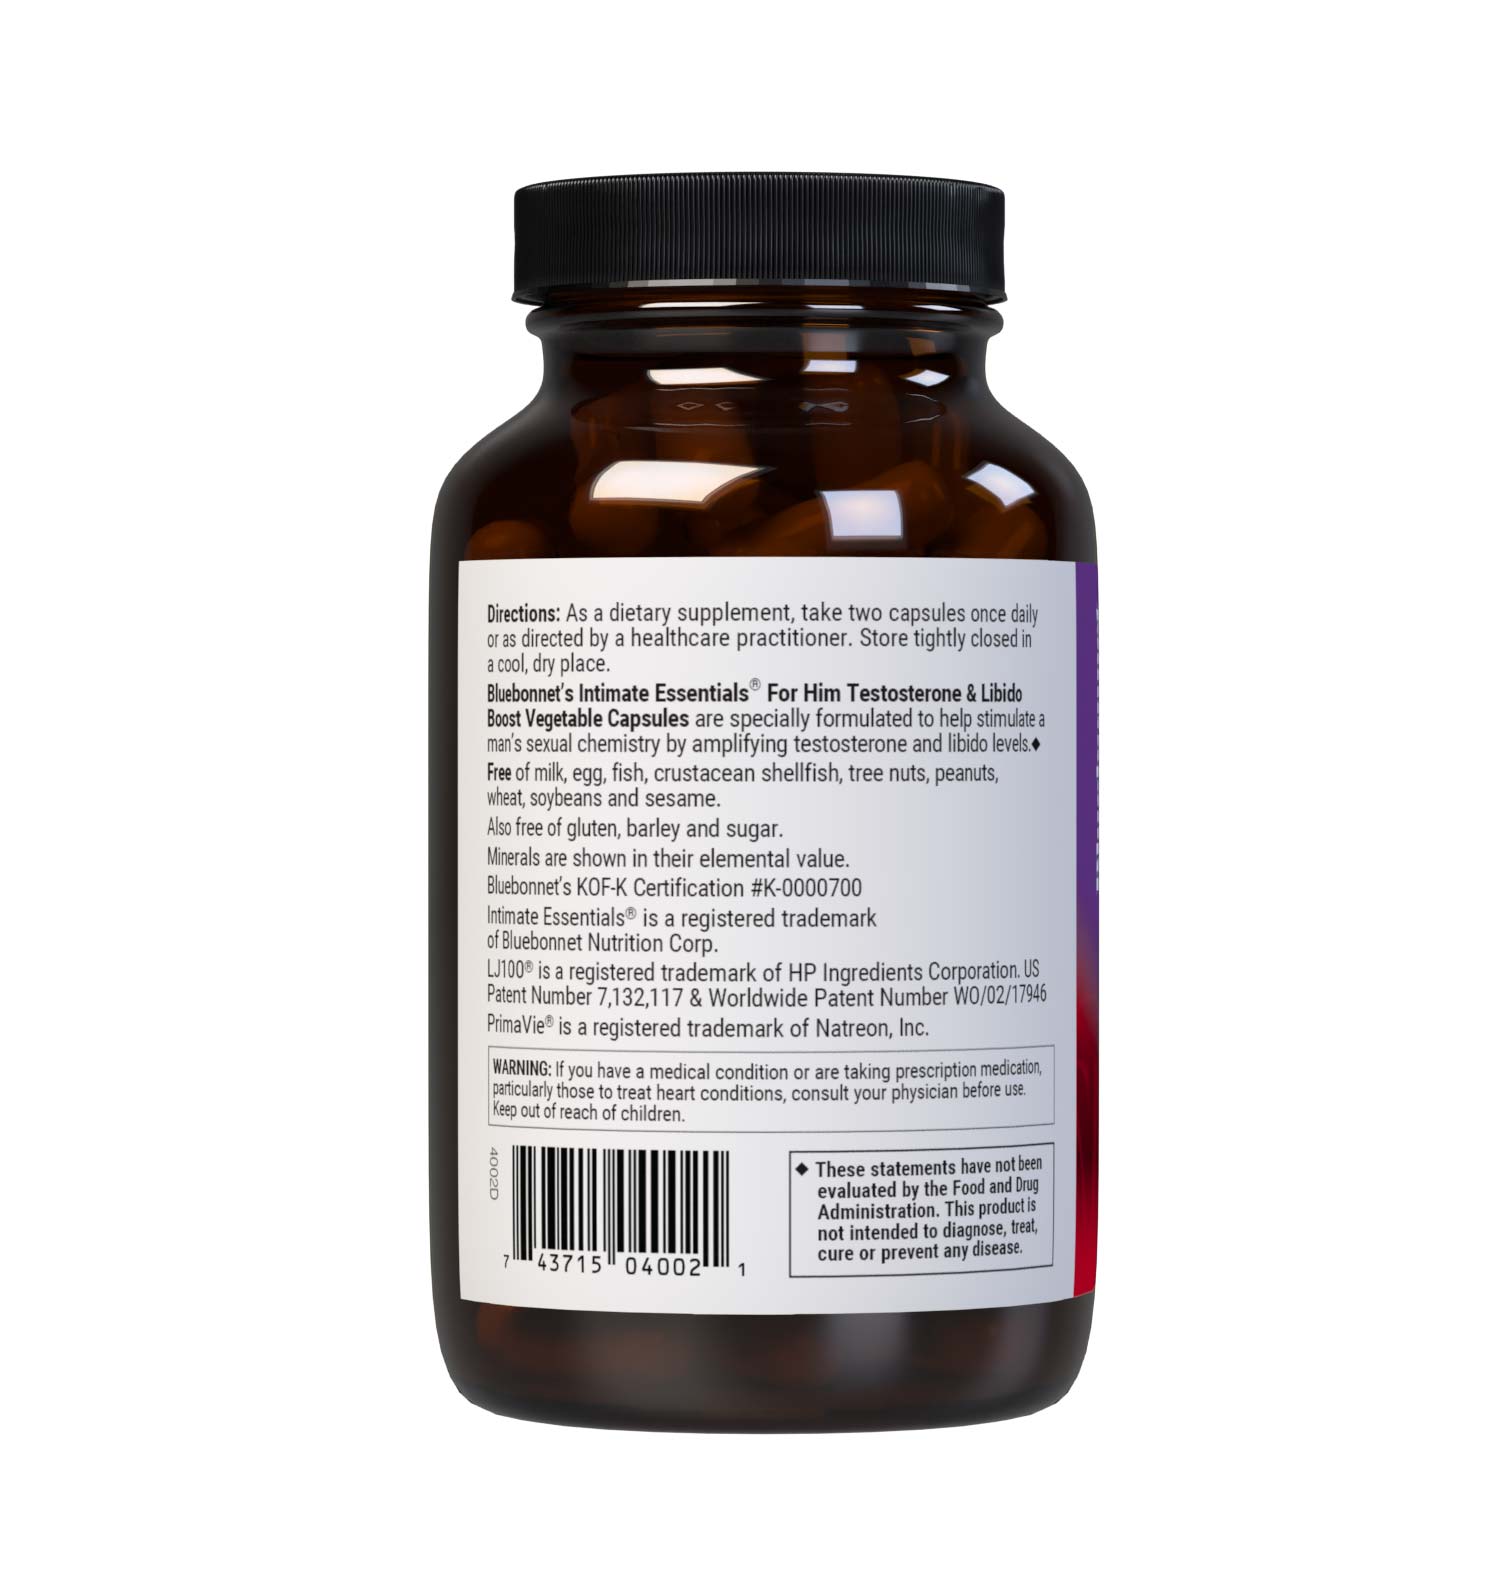 Bluebonnet’s Intimate Essentials For Him Testosterone & Libido Boost Vegetable Capsules are specially formulated to help stimulate a man’s sexual chemistry by amplifying testosterone and libido levels. Description panel. #size_60 count